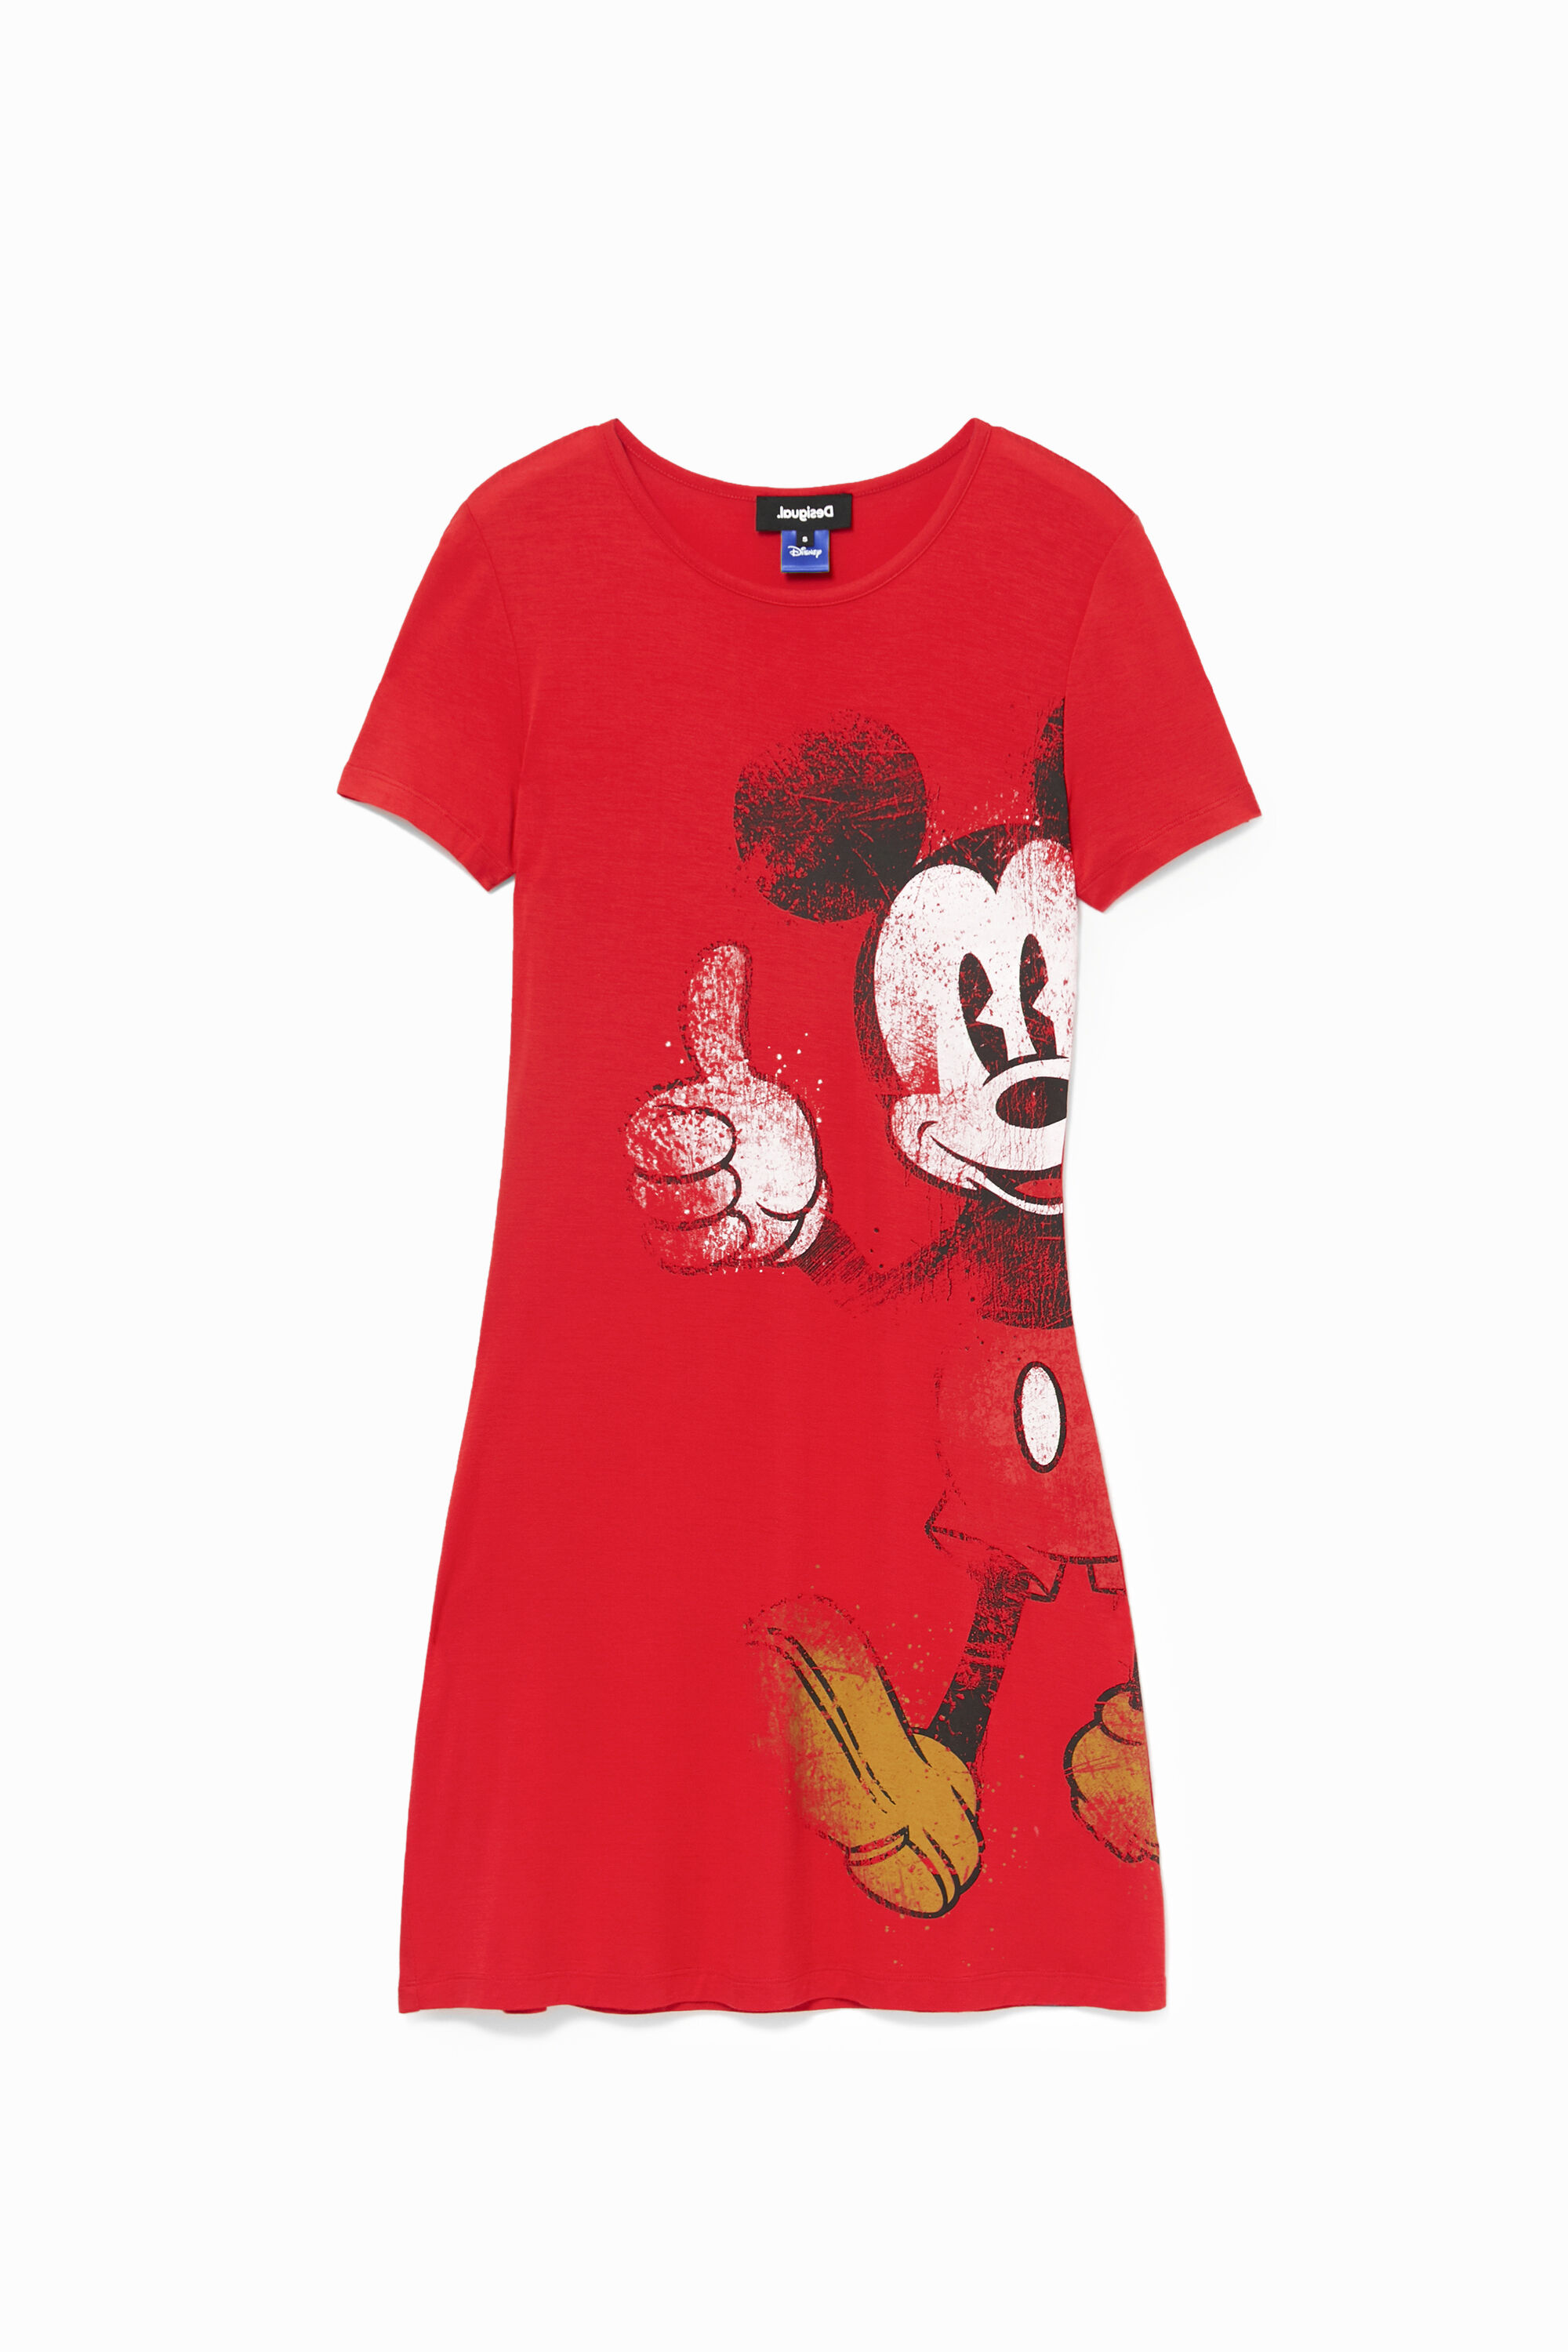 Mickey Mouse T-shirt dress - RED - S